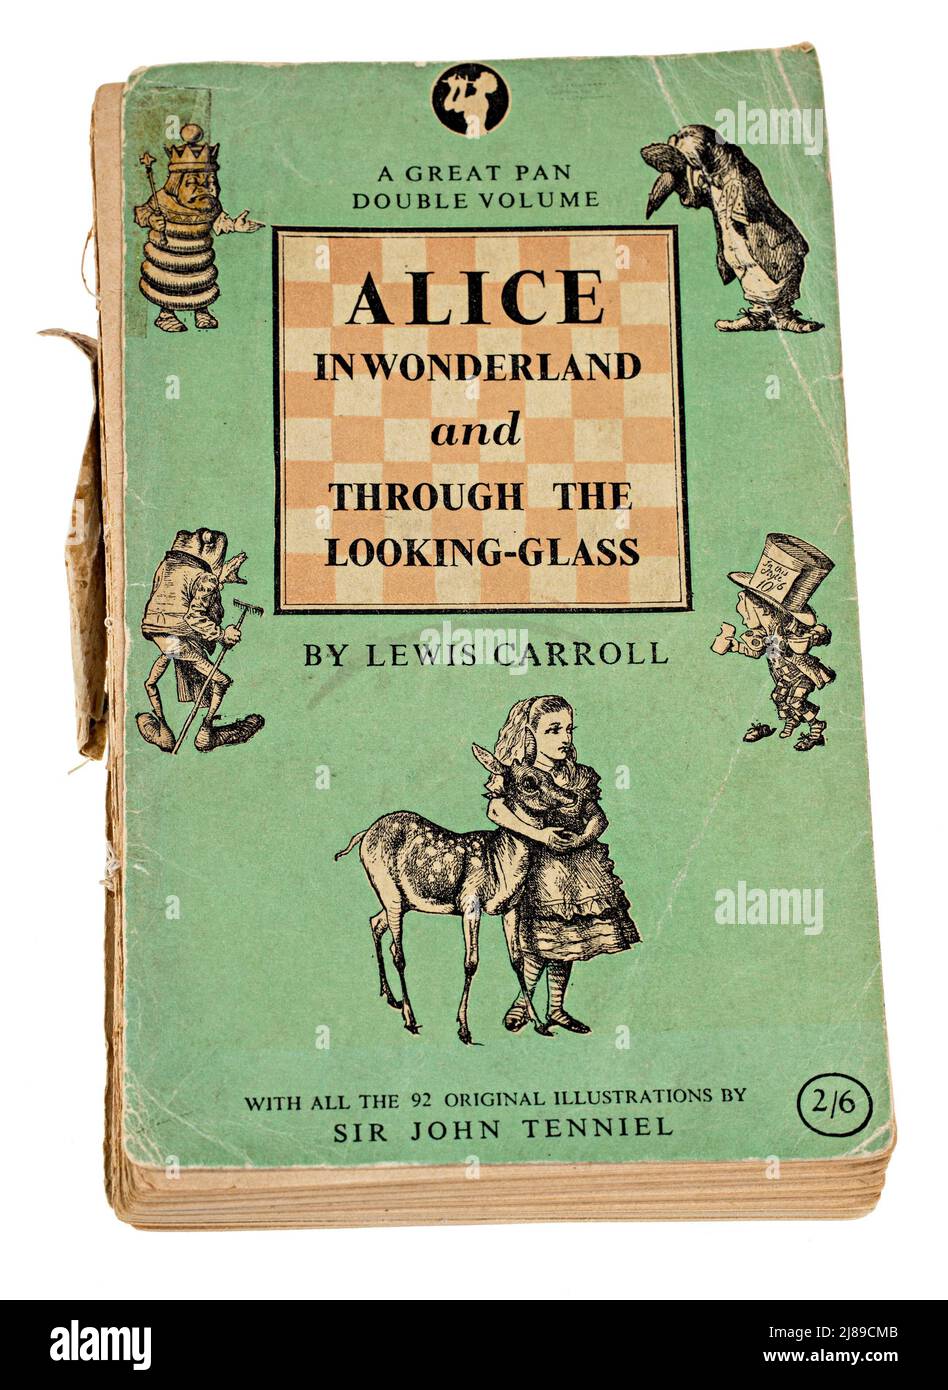 Alice in Wonderland and Through the Looking Glass, Great Pan paperback book, by Kewis Carroll, this edition 1947 with illustrations by John Tenniel, f Stock Photo